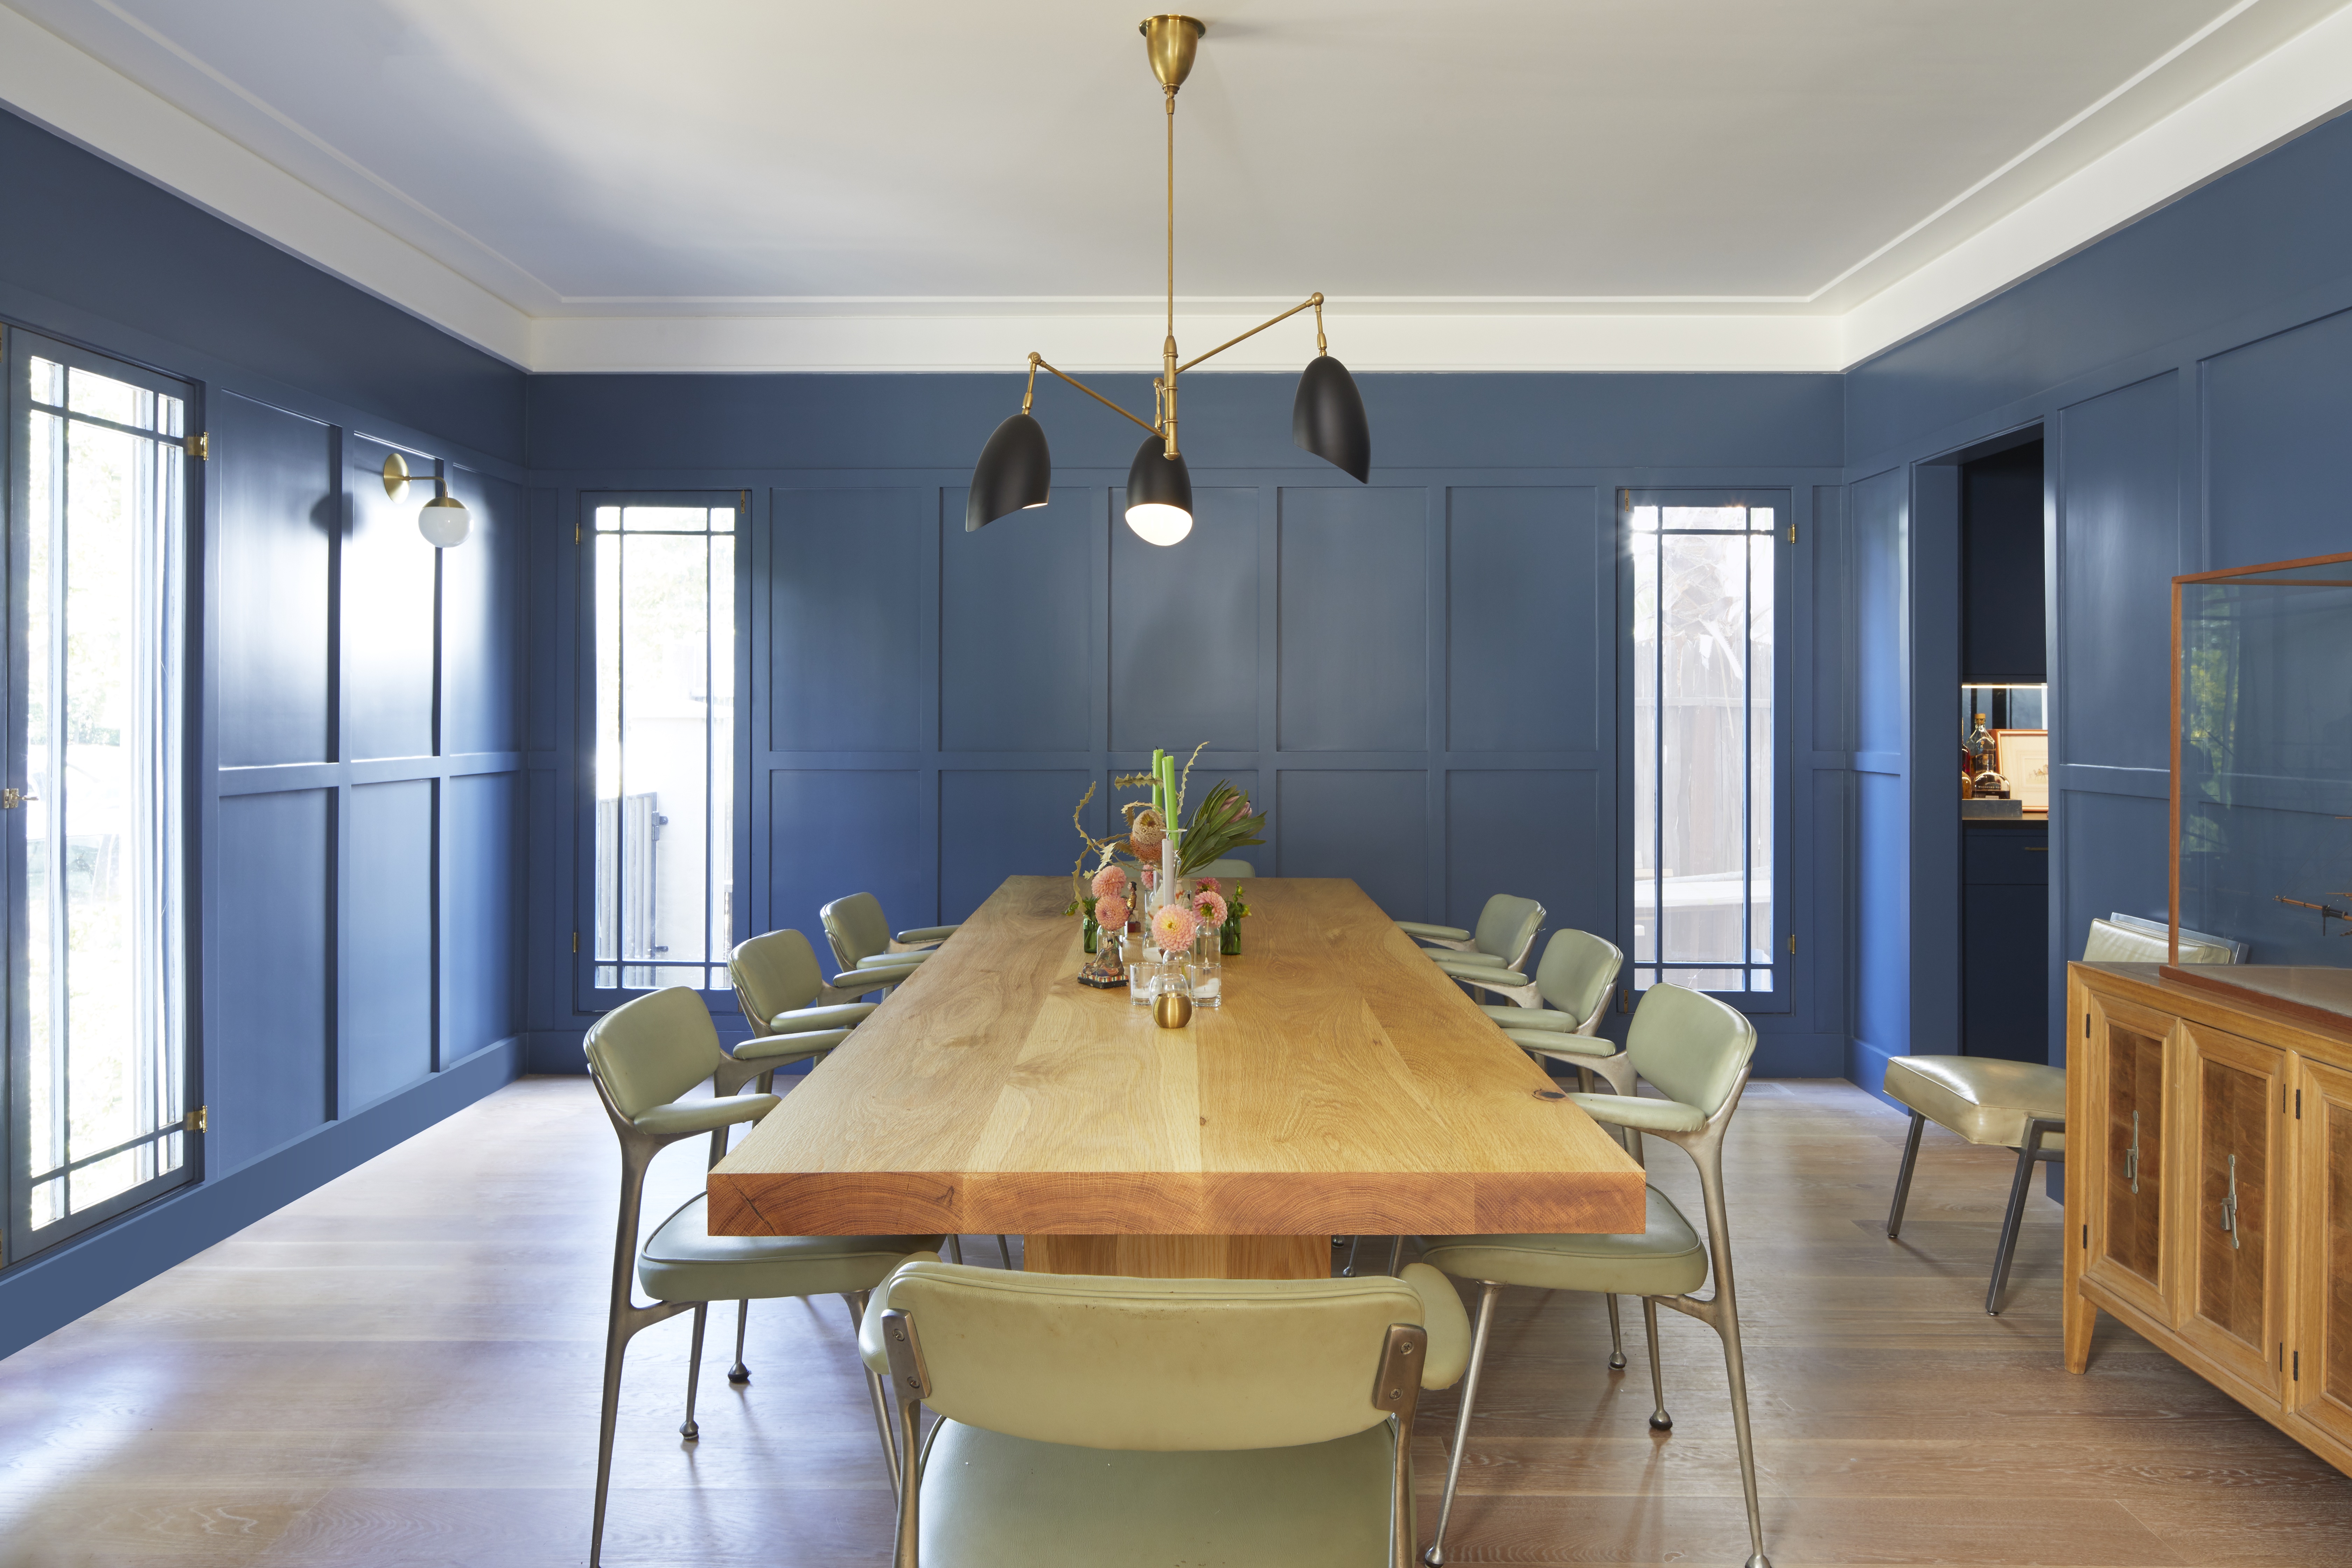 Reclaim Your Dining Room with These Design Ideas   Sunset Magazine